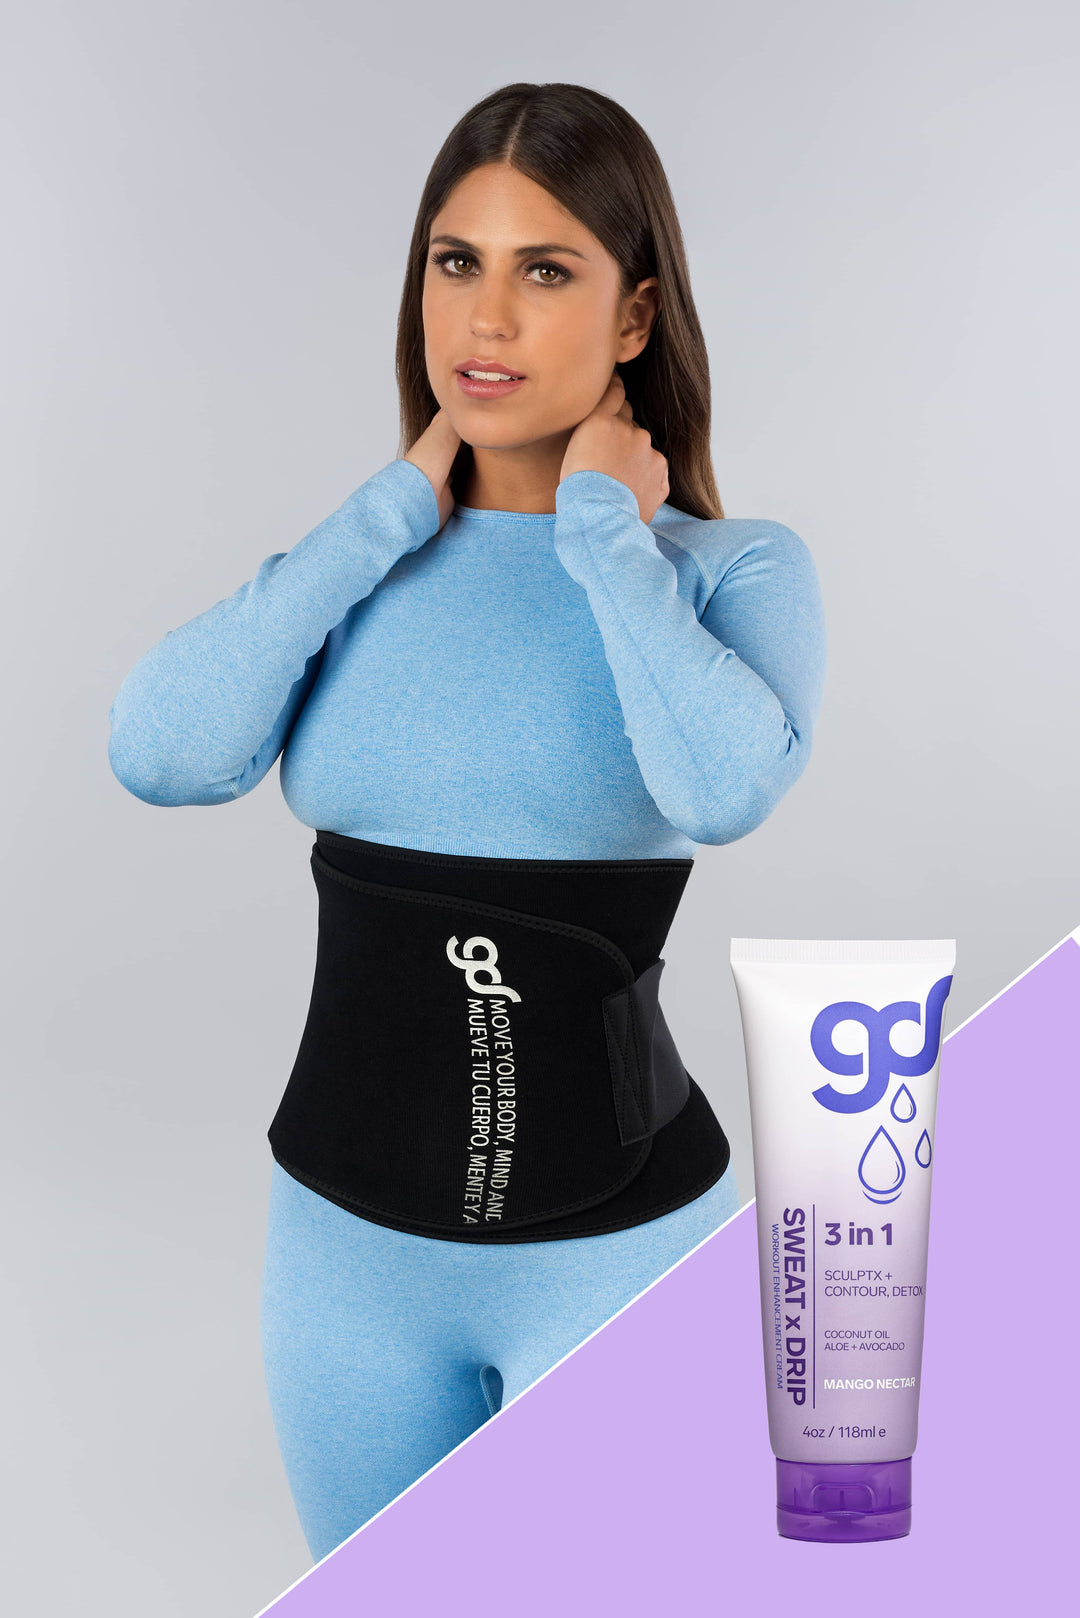 BEST COLLECTION ANY TIME Sweat Belt for Waist Fitting Slimming